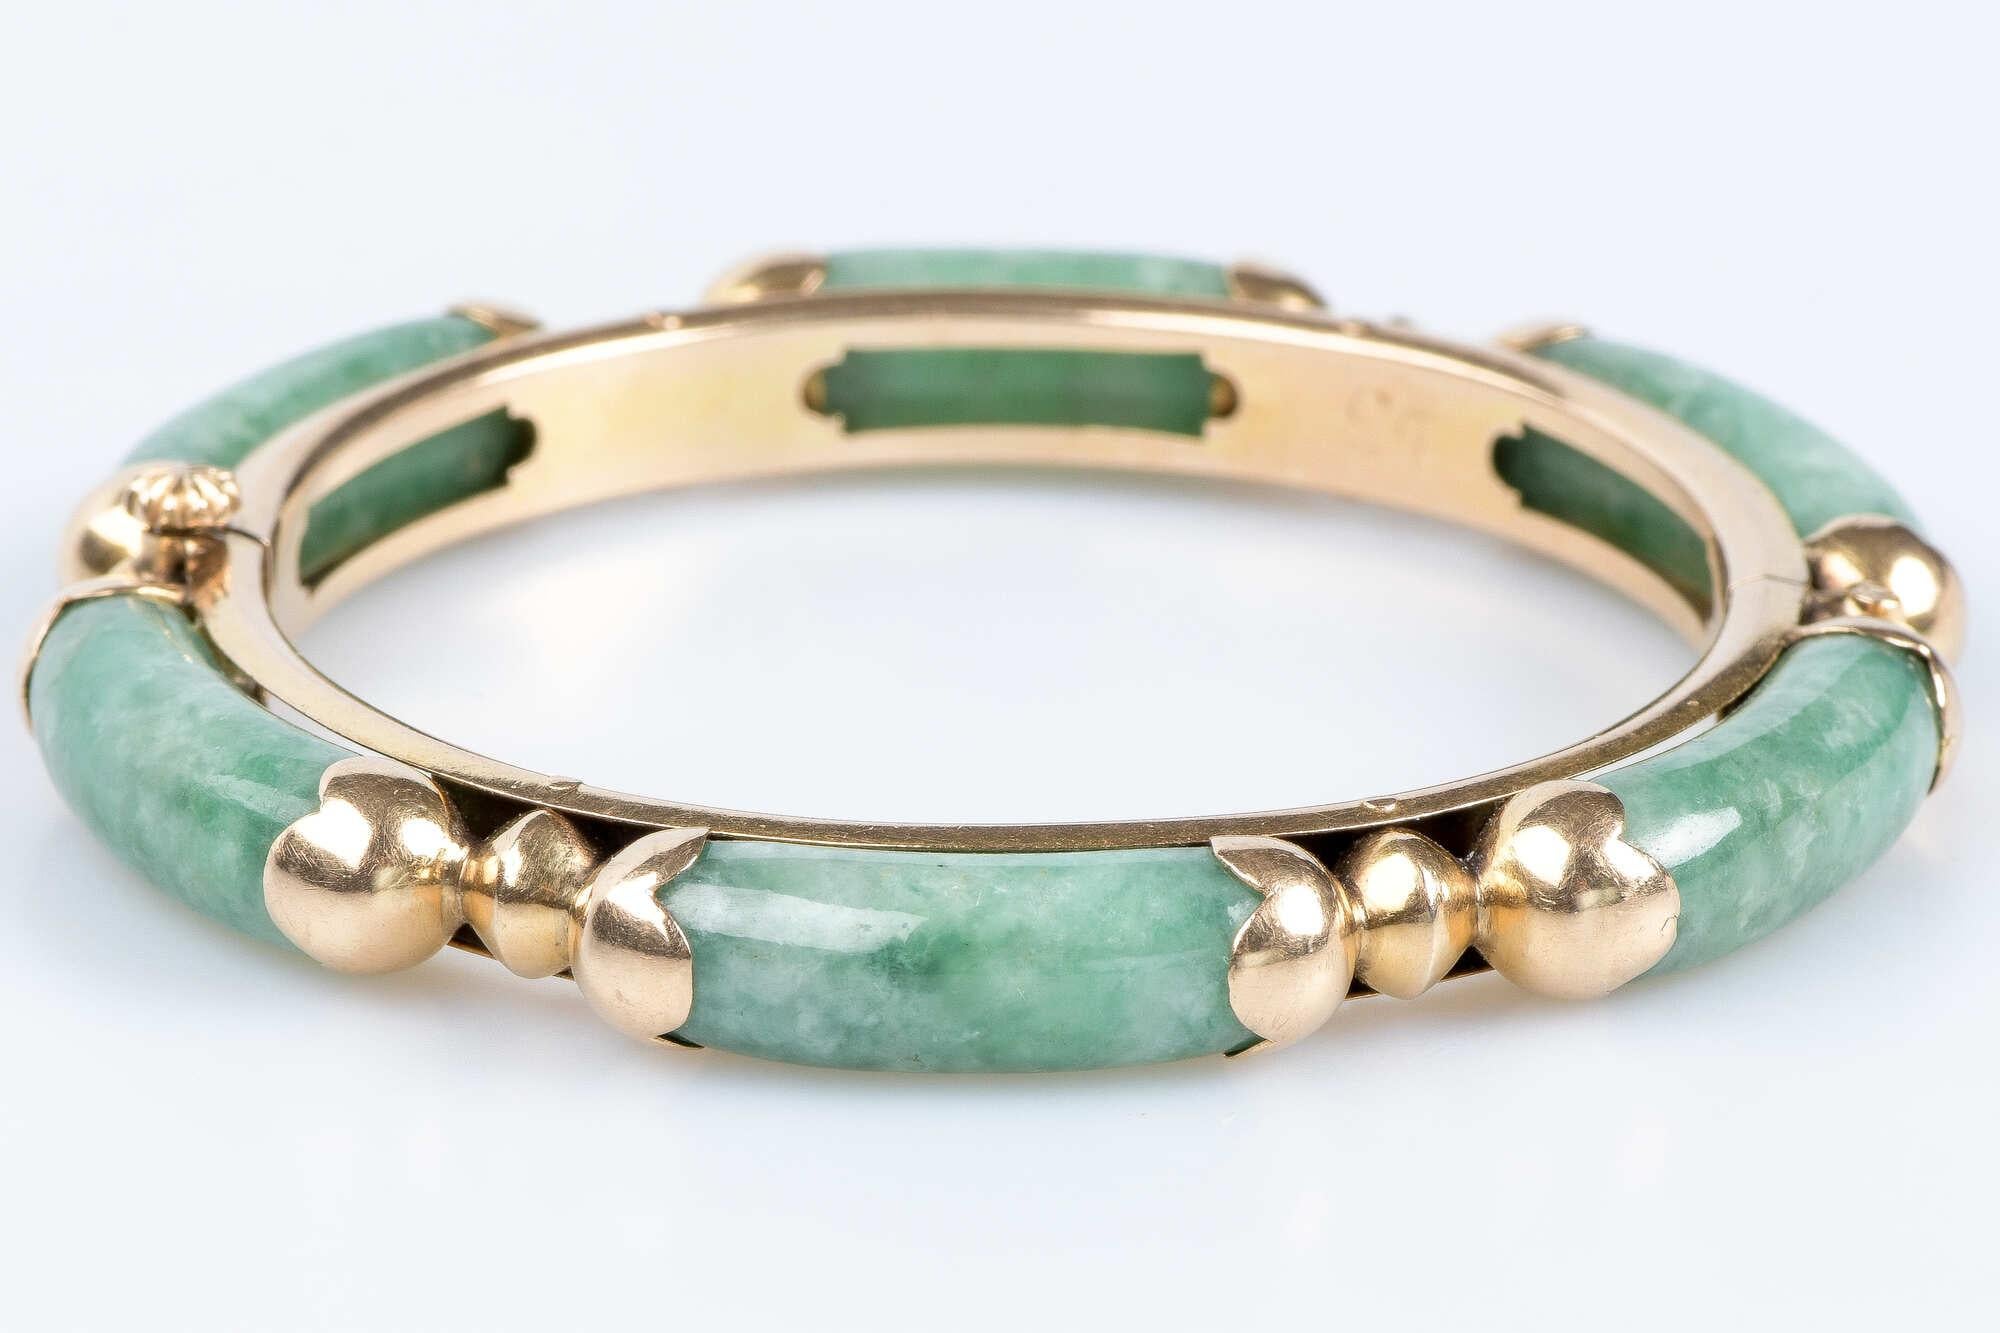 Women's 18K yellow gold bracelet with 6 jades.  For Sale